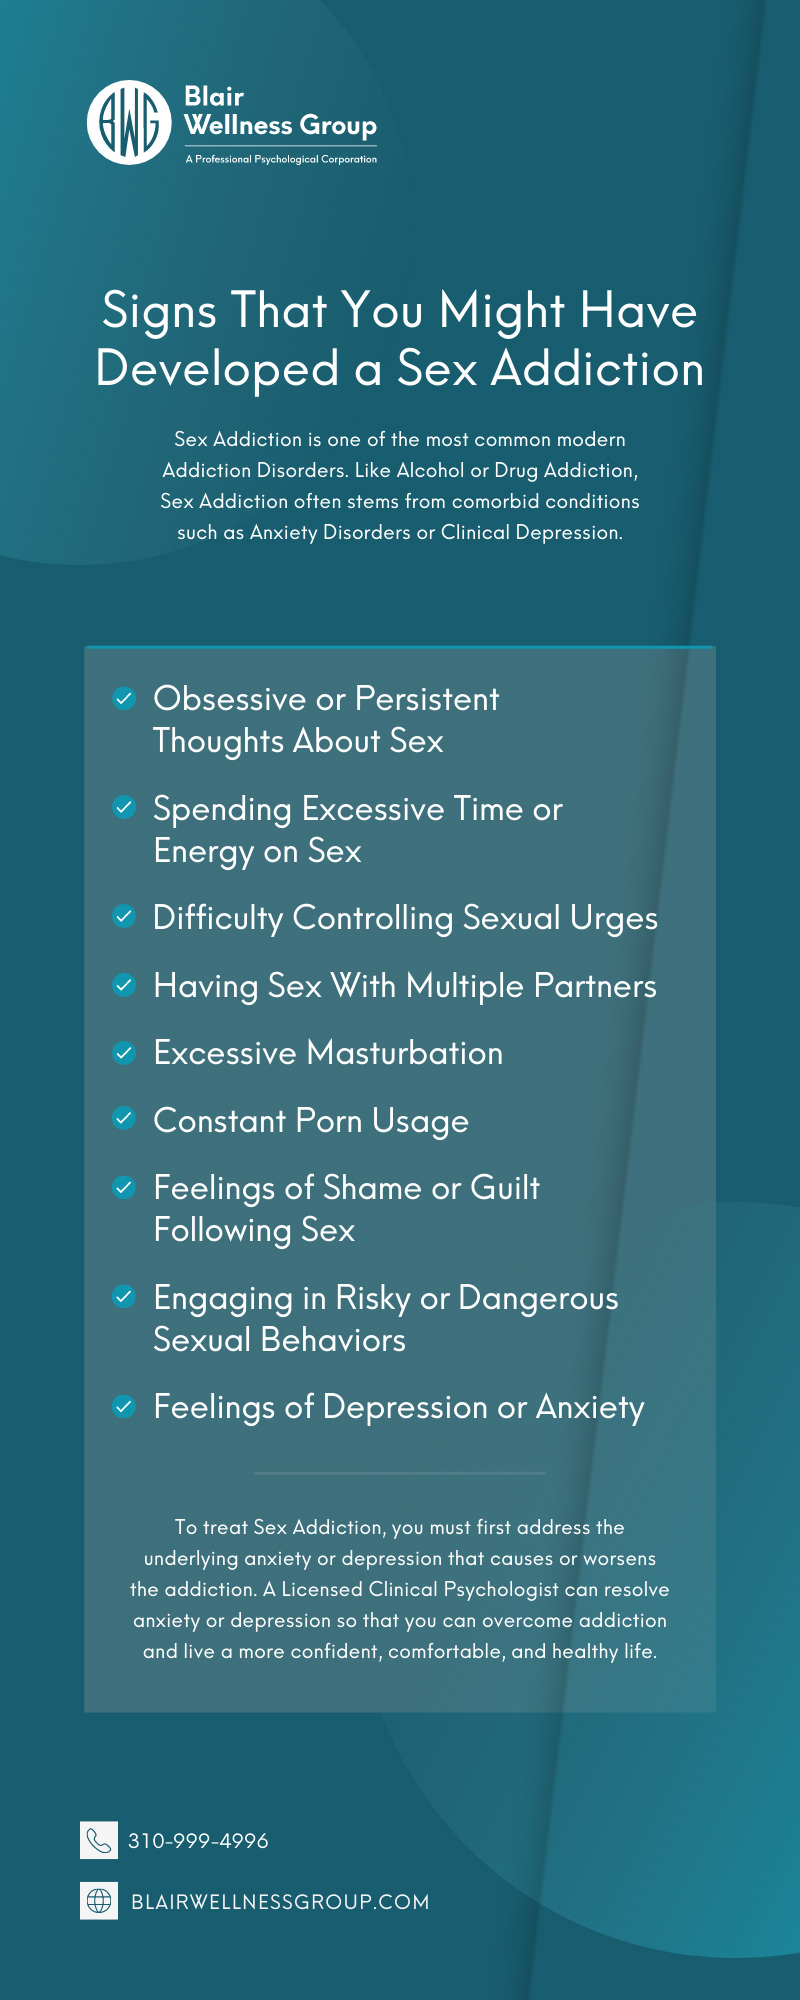 Signs That You Might Have Developed a Sex Addiction